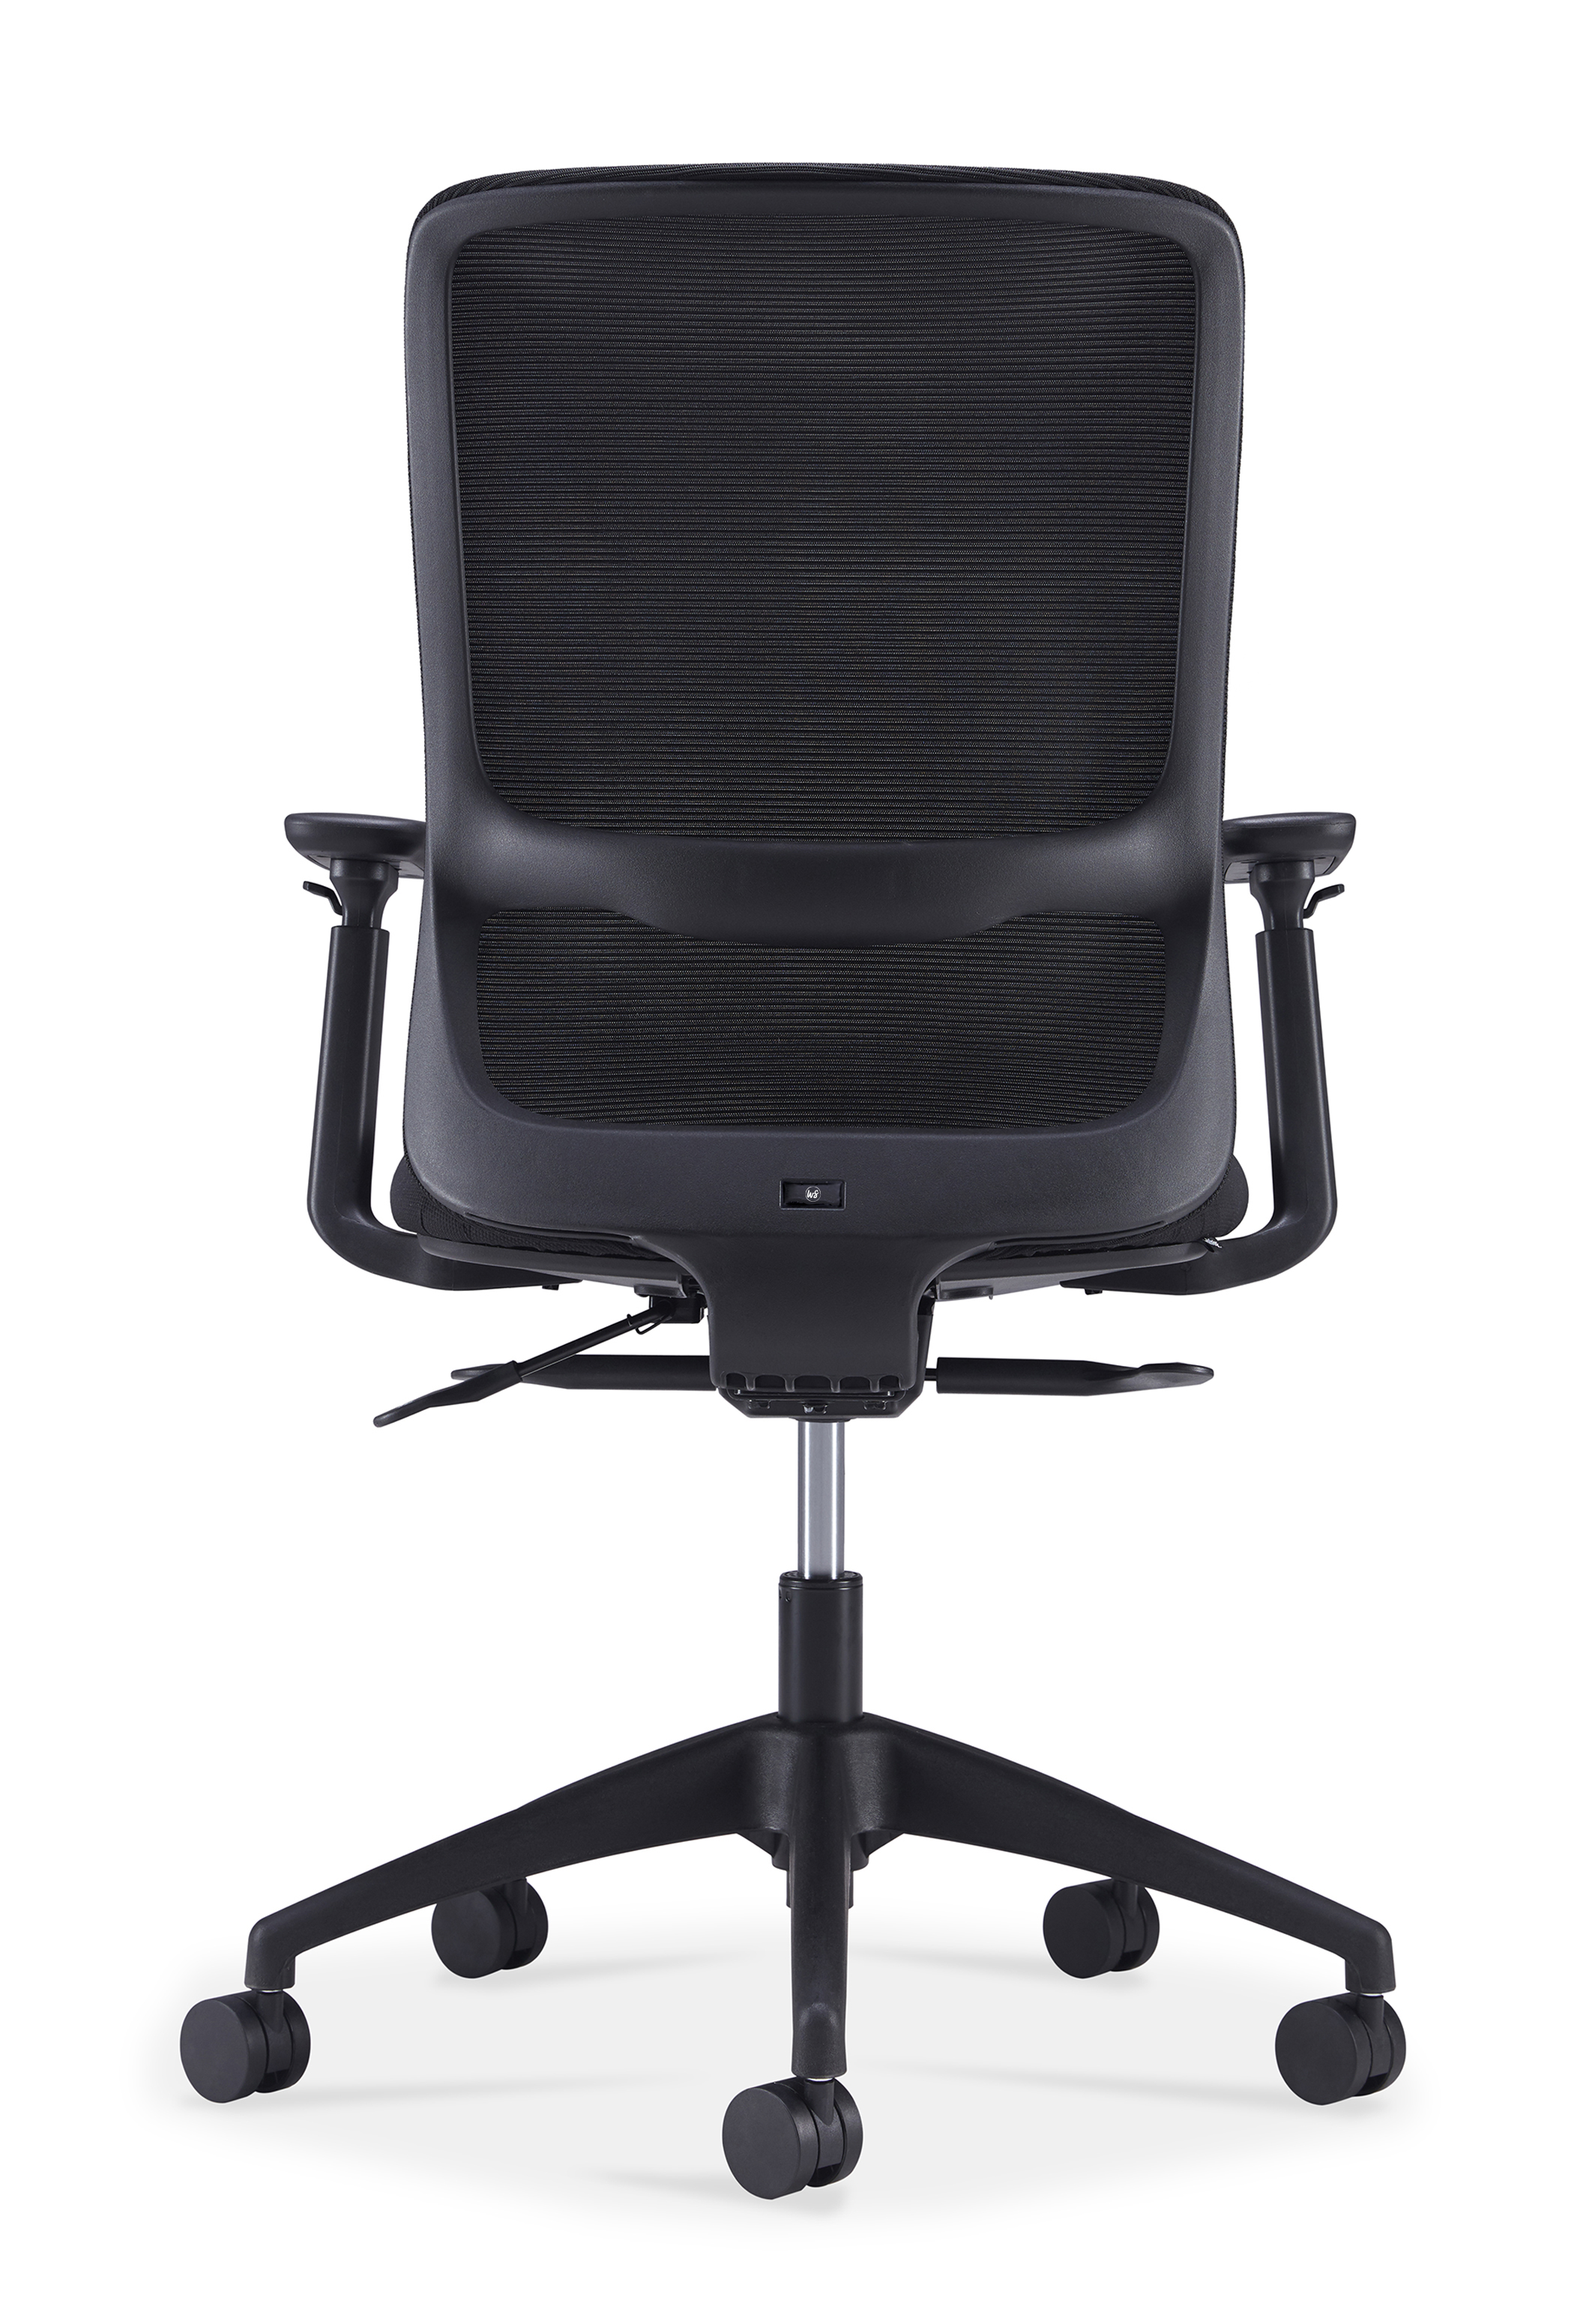 WS - L21 task chair (Back)